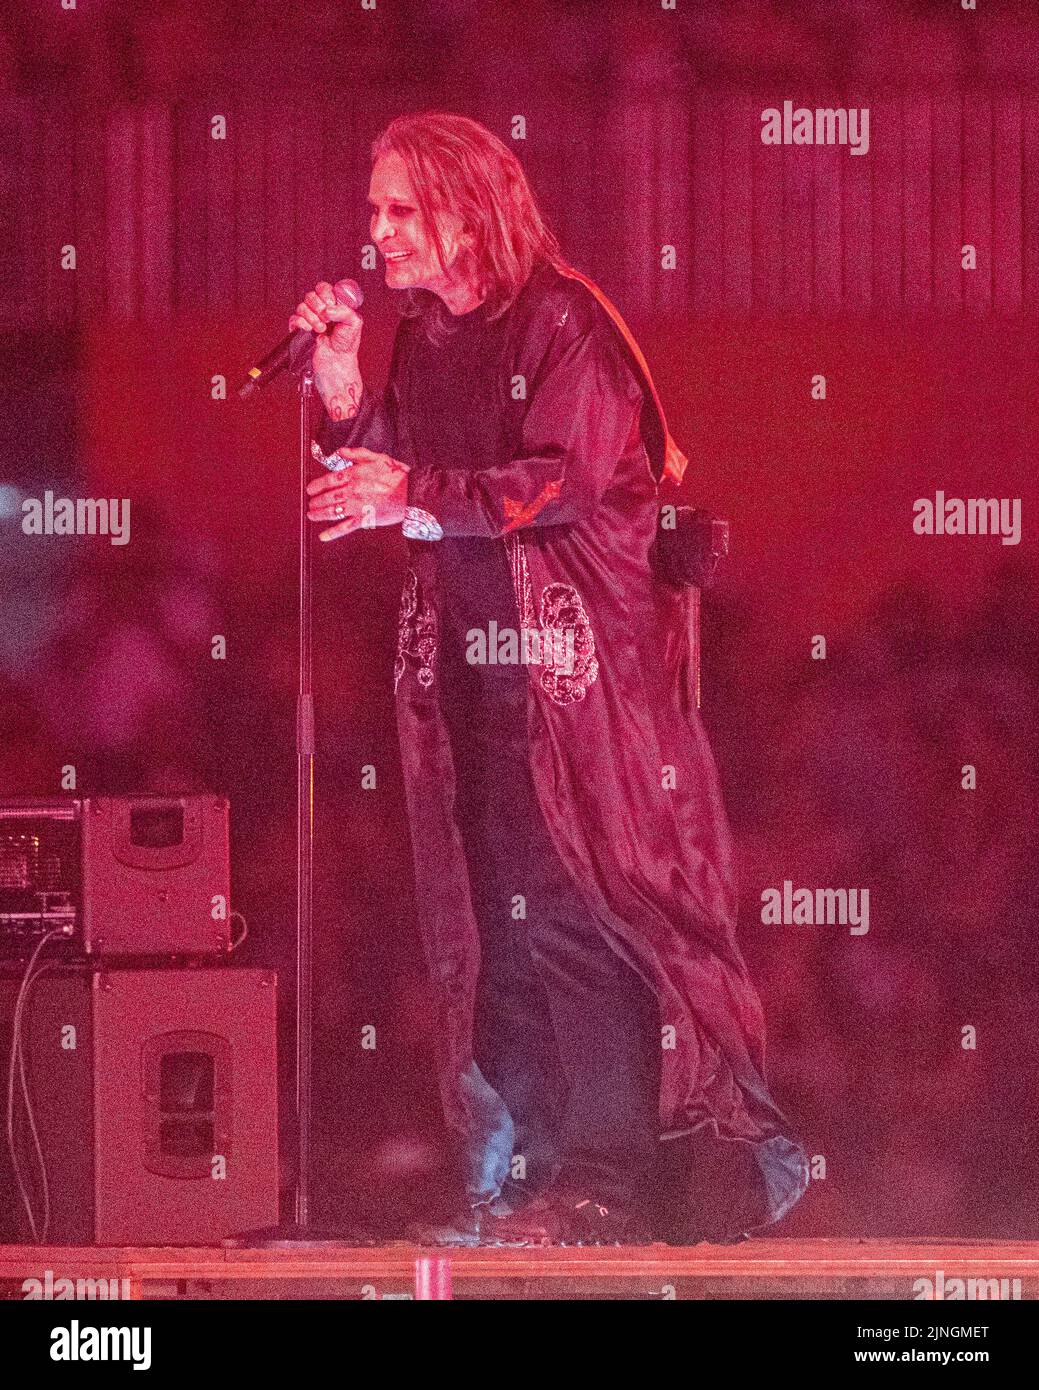 Ozzy Osbourne Stages Surprise Black Sabbath Reunion at 2022 Commonwealth Games Closing Ceremony Stock Photo